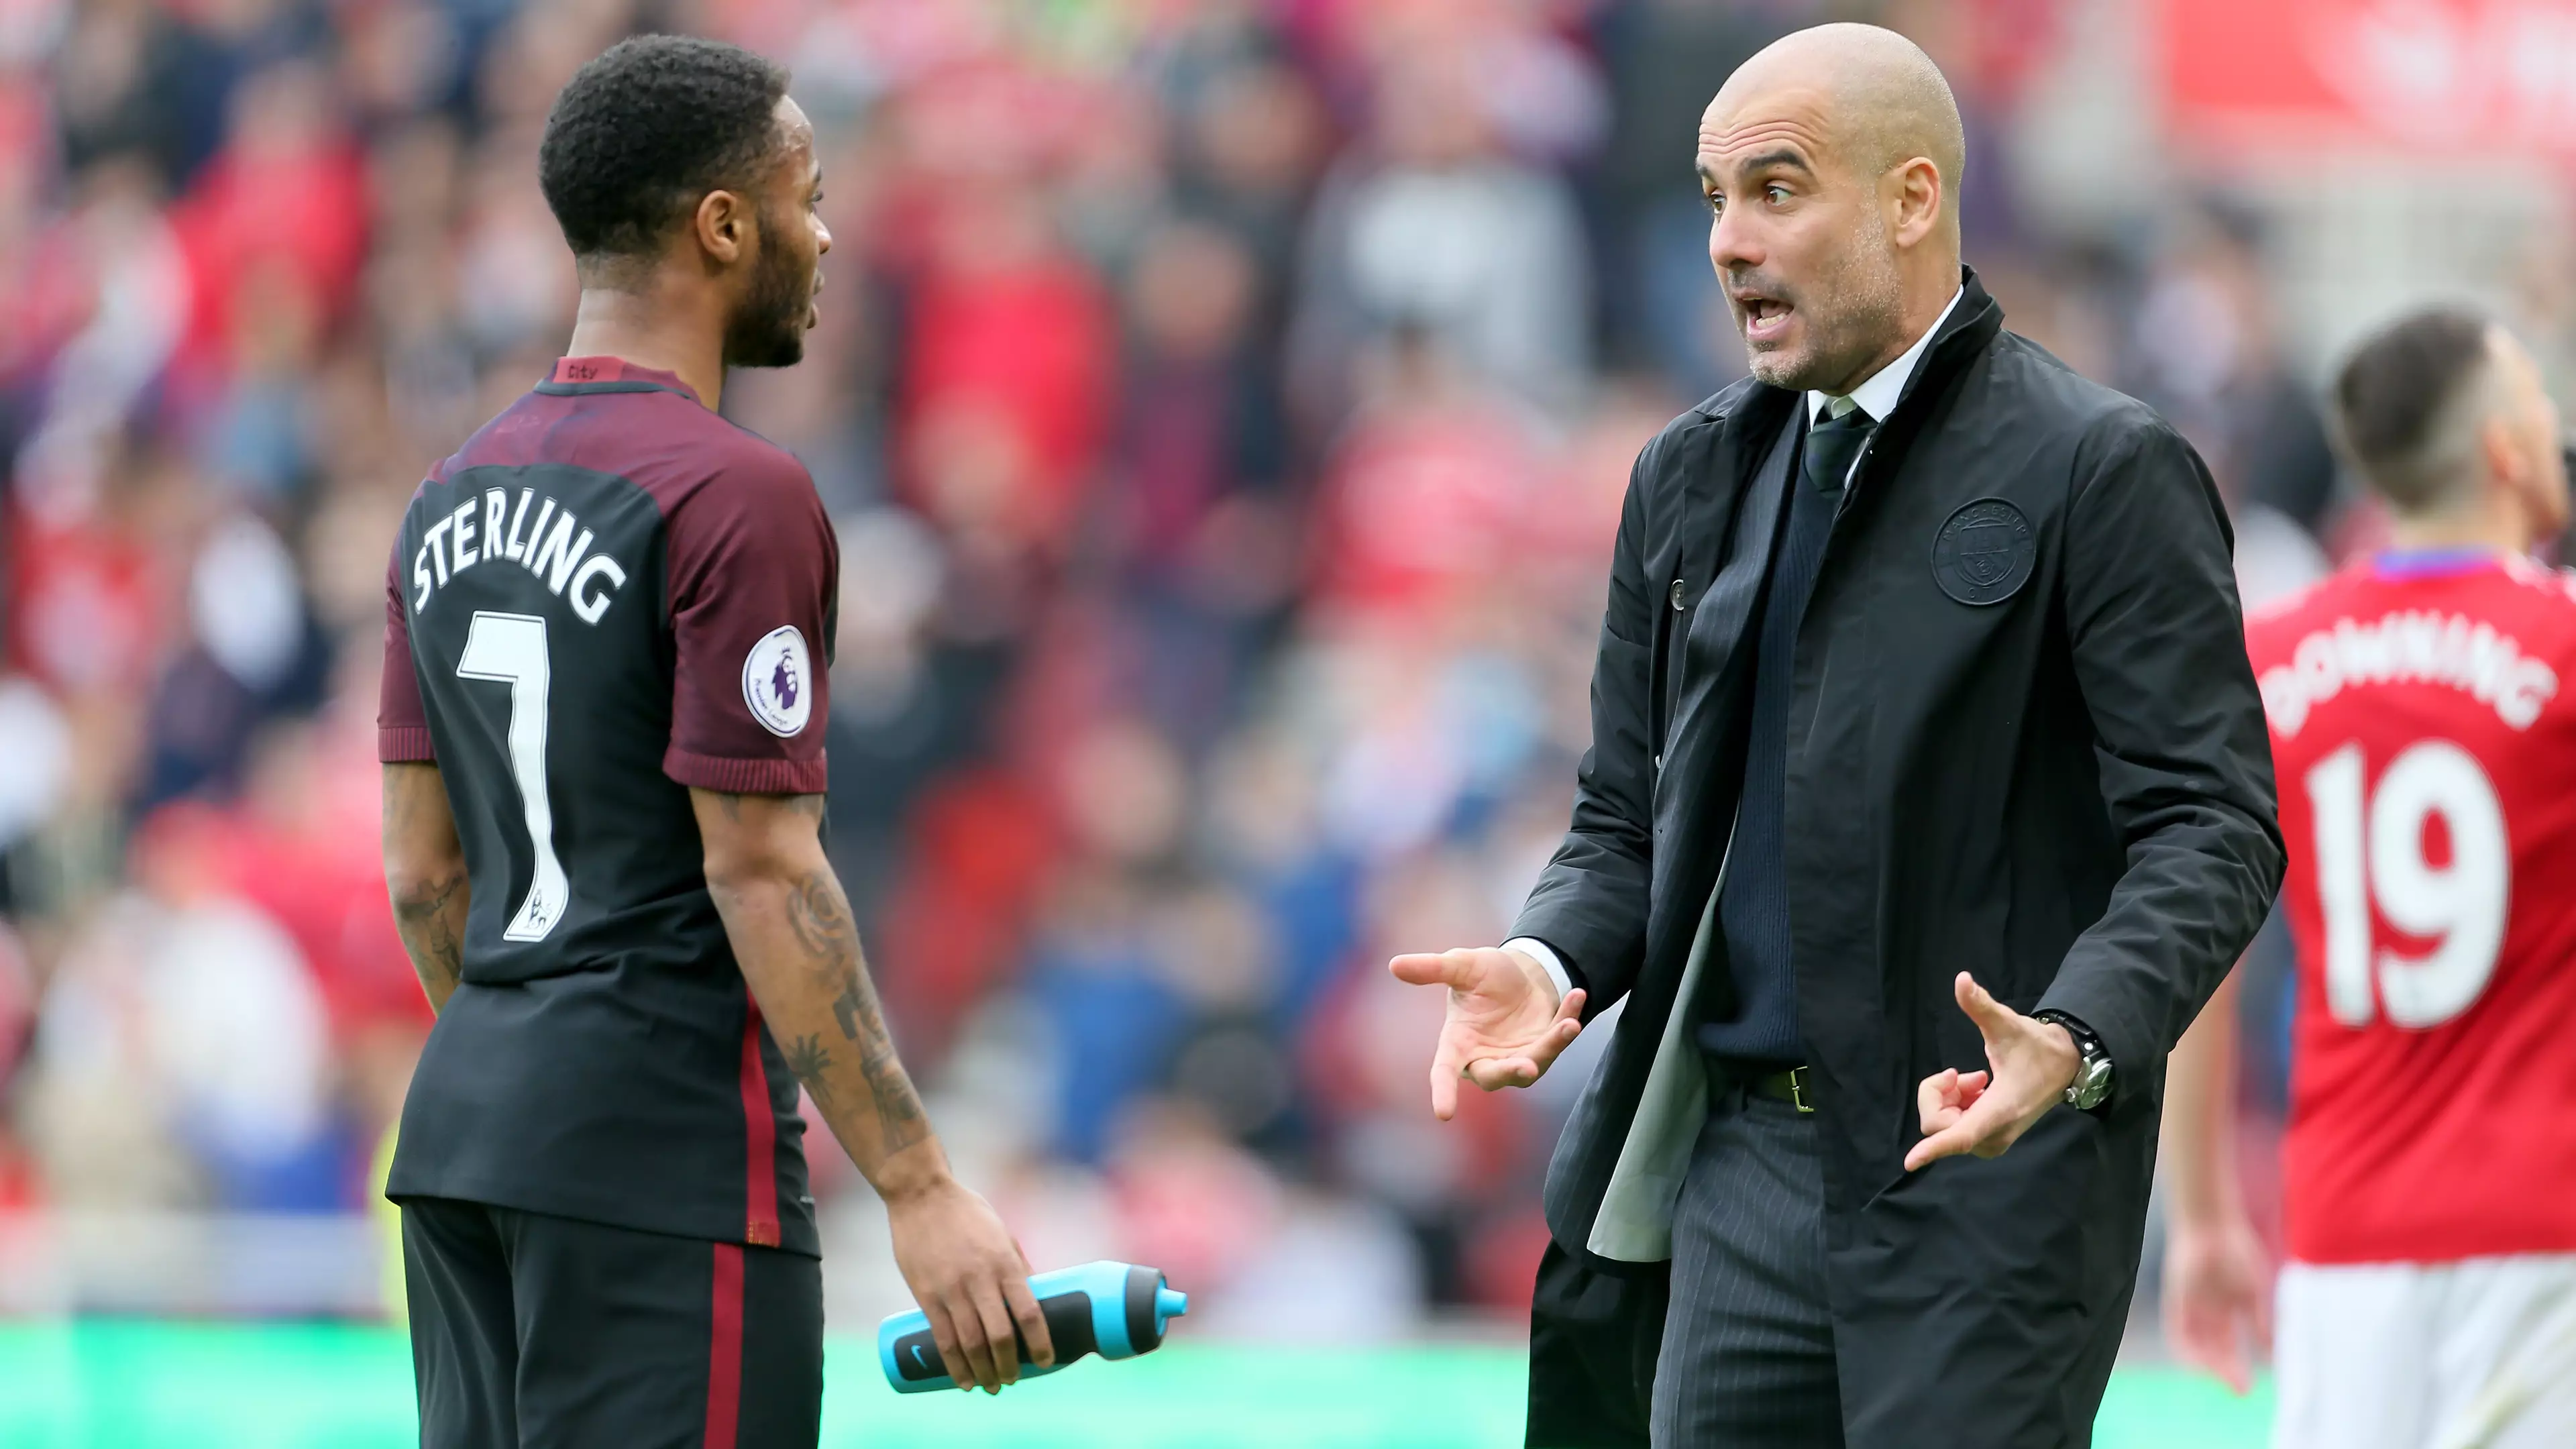 Raheem Sterling Isn't Happy About Being Offered To Arsenal